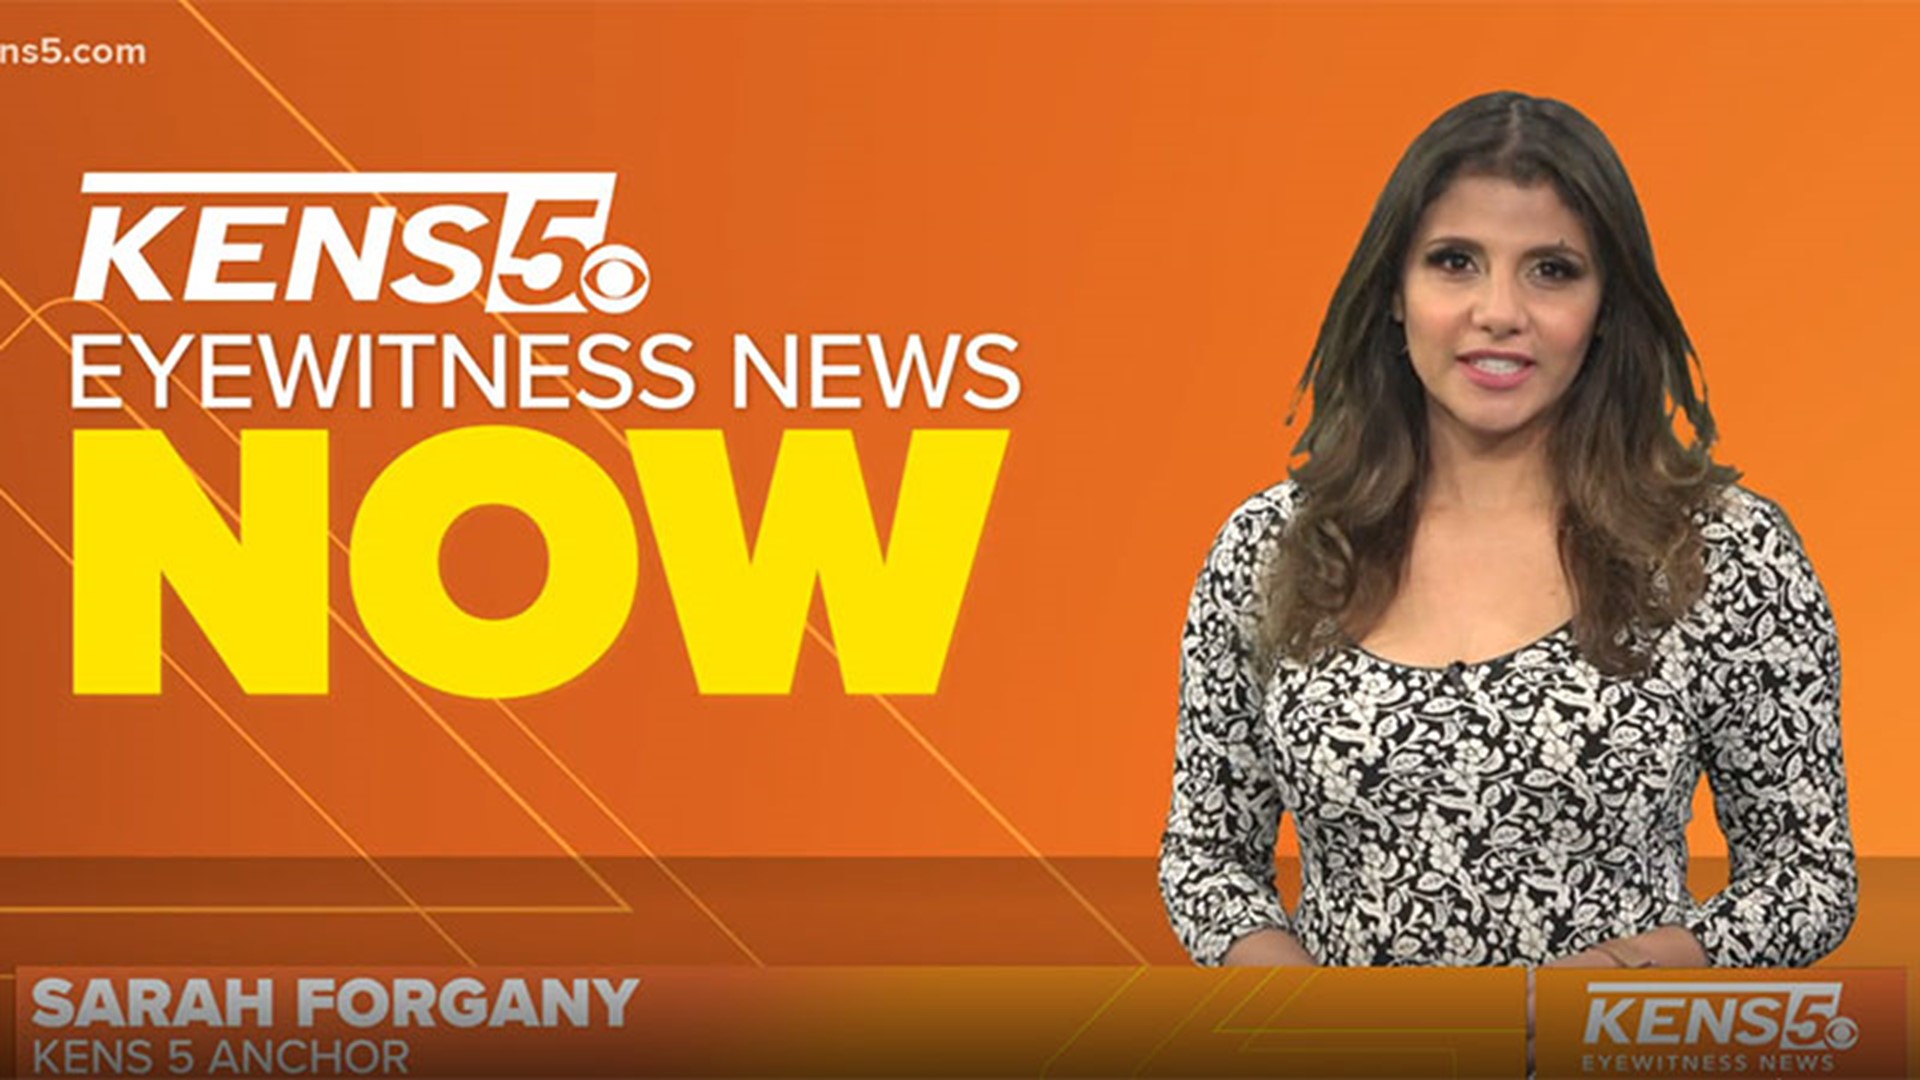 Follow us to get the latest with KENS 5's Sarah Forgany every weekday.